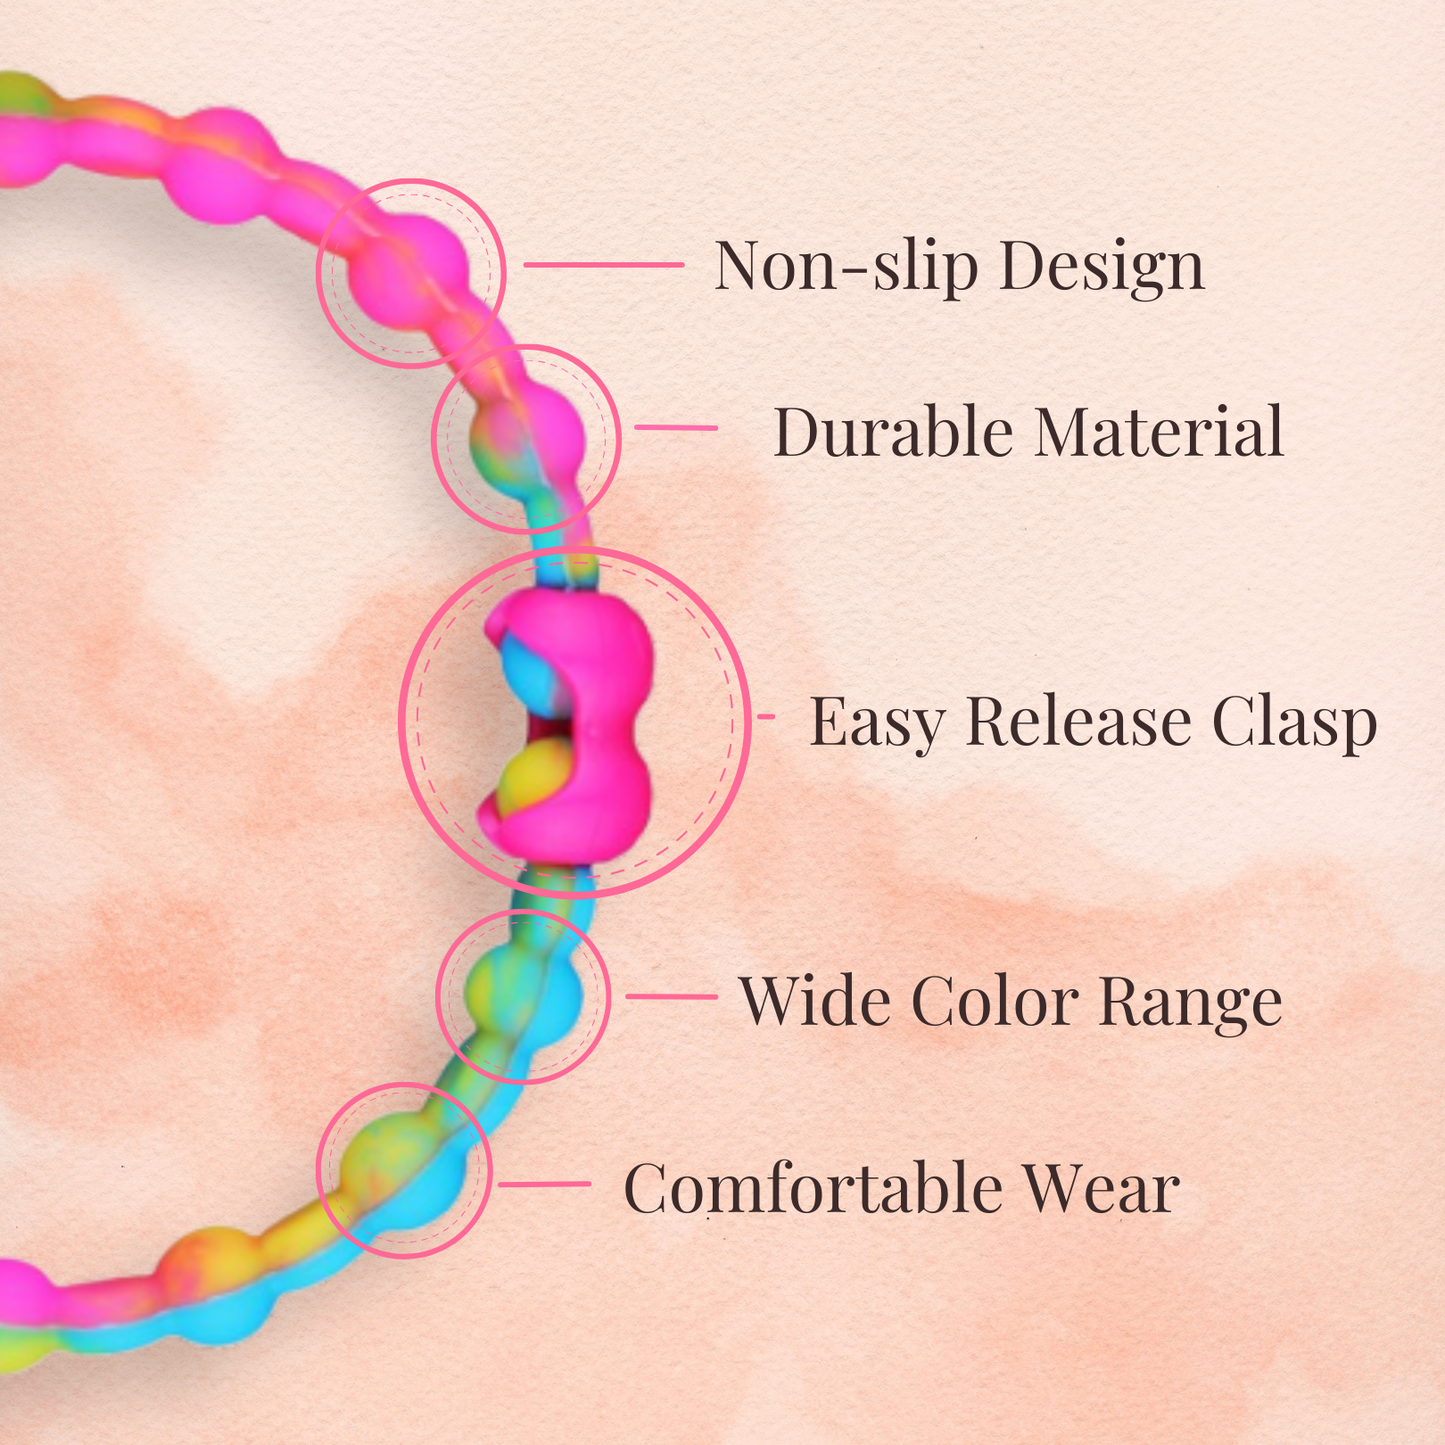 Baby Blue Hair Ties: Easy Release Adjustable for Every Hair Type PACK OF 4